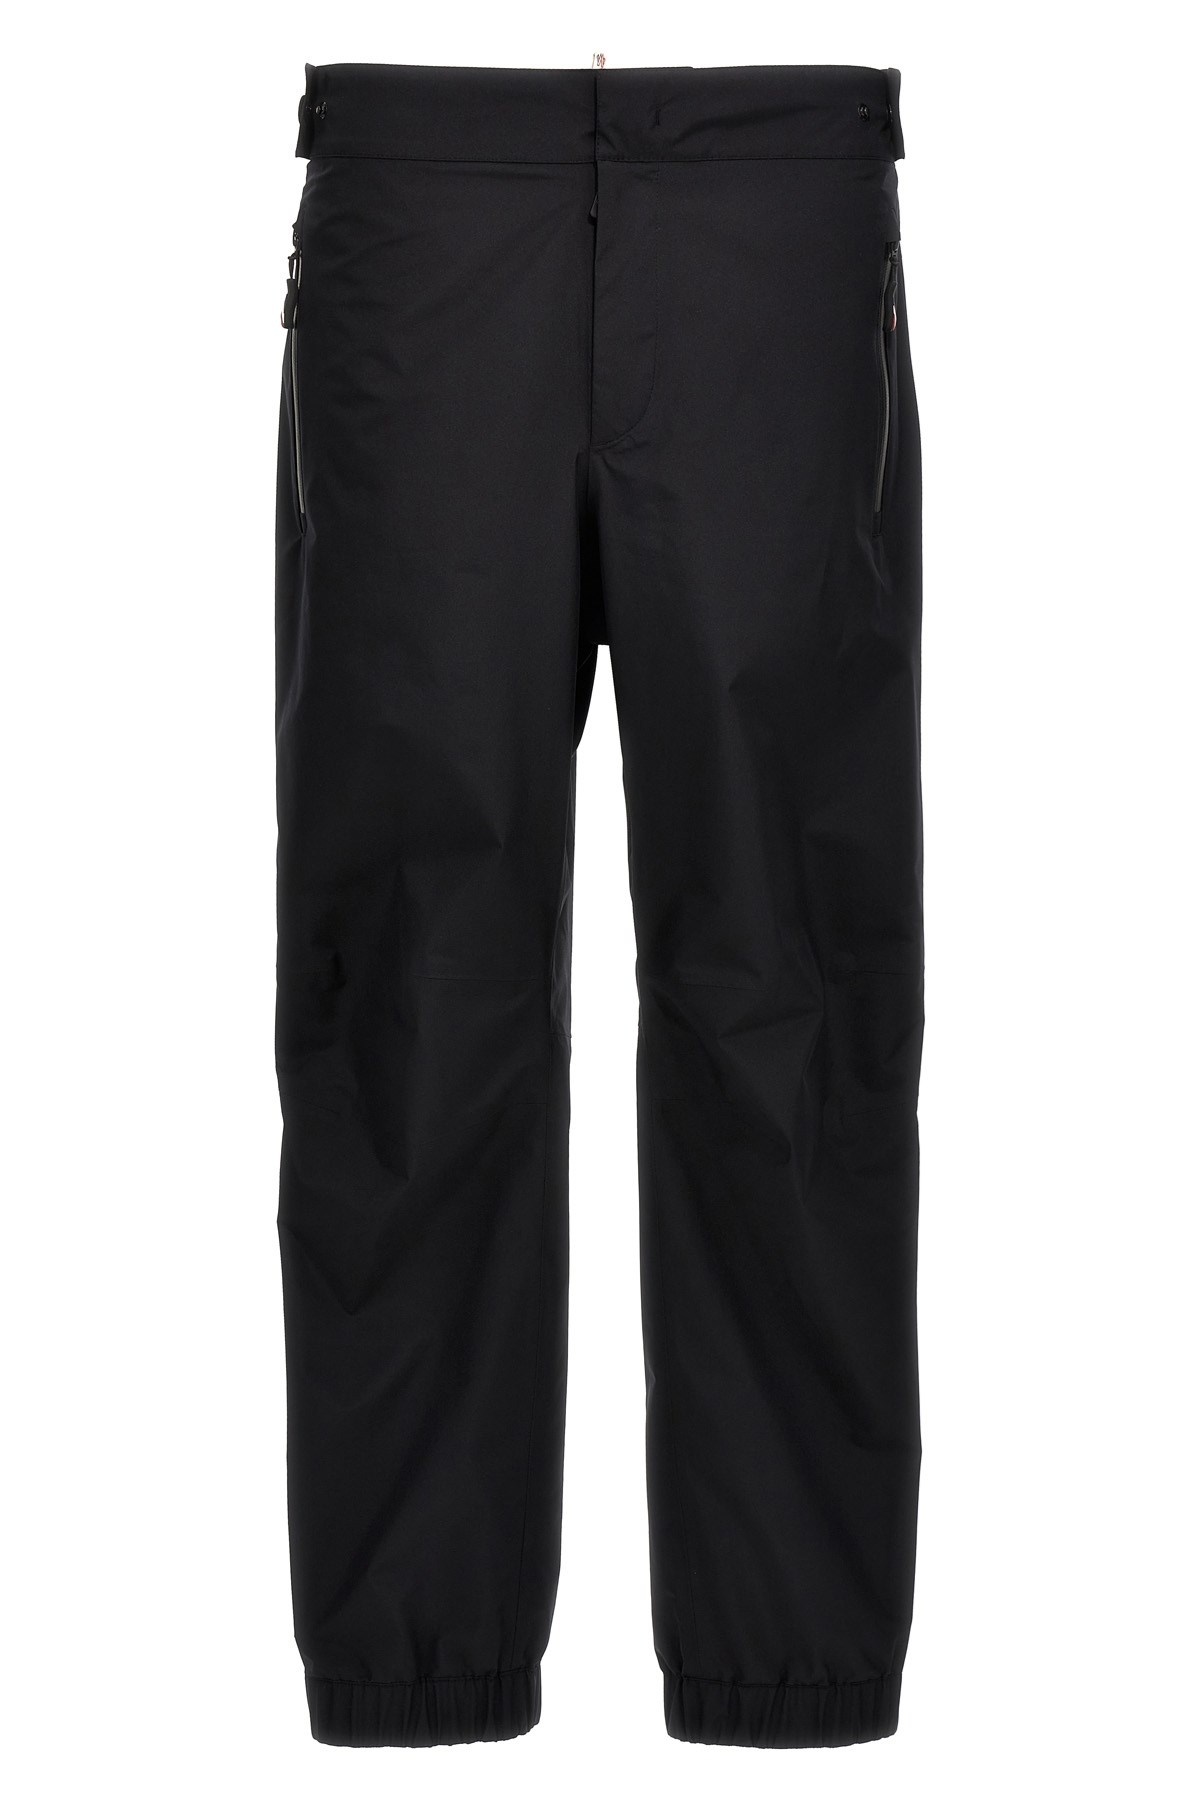 GORE-TEX trousers - 1